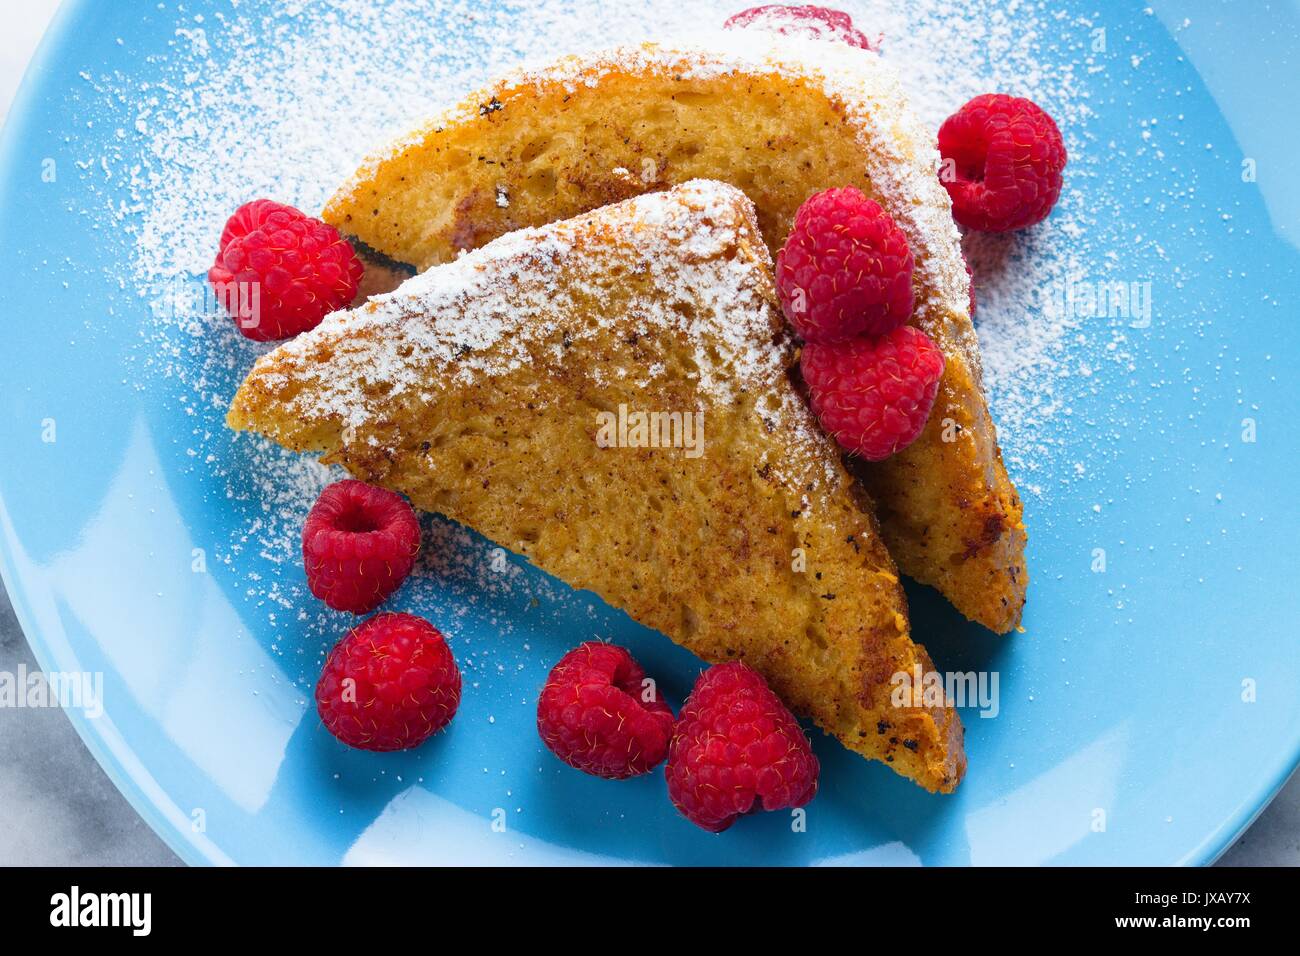 Fresh french toast richly covered by powdered sugar and raspberries Stock Photo